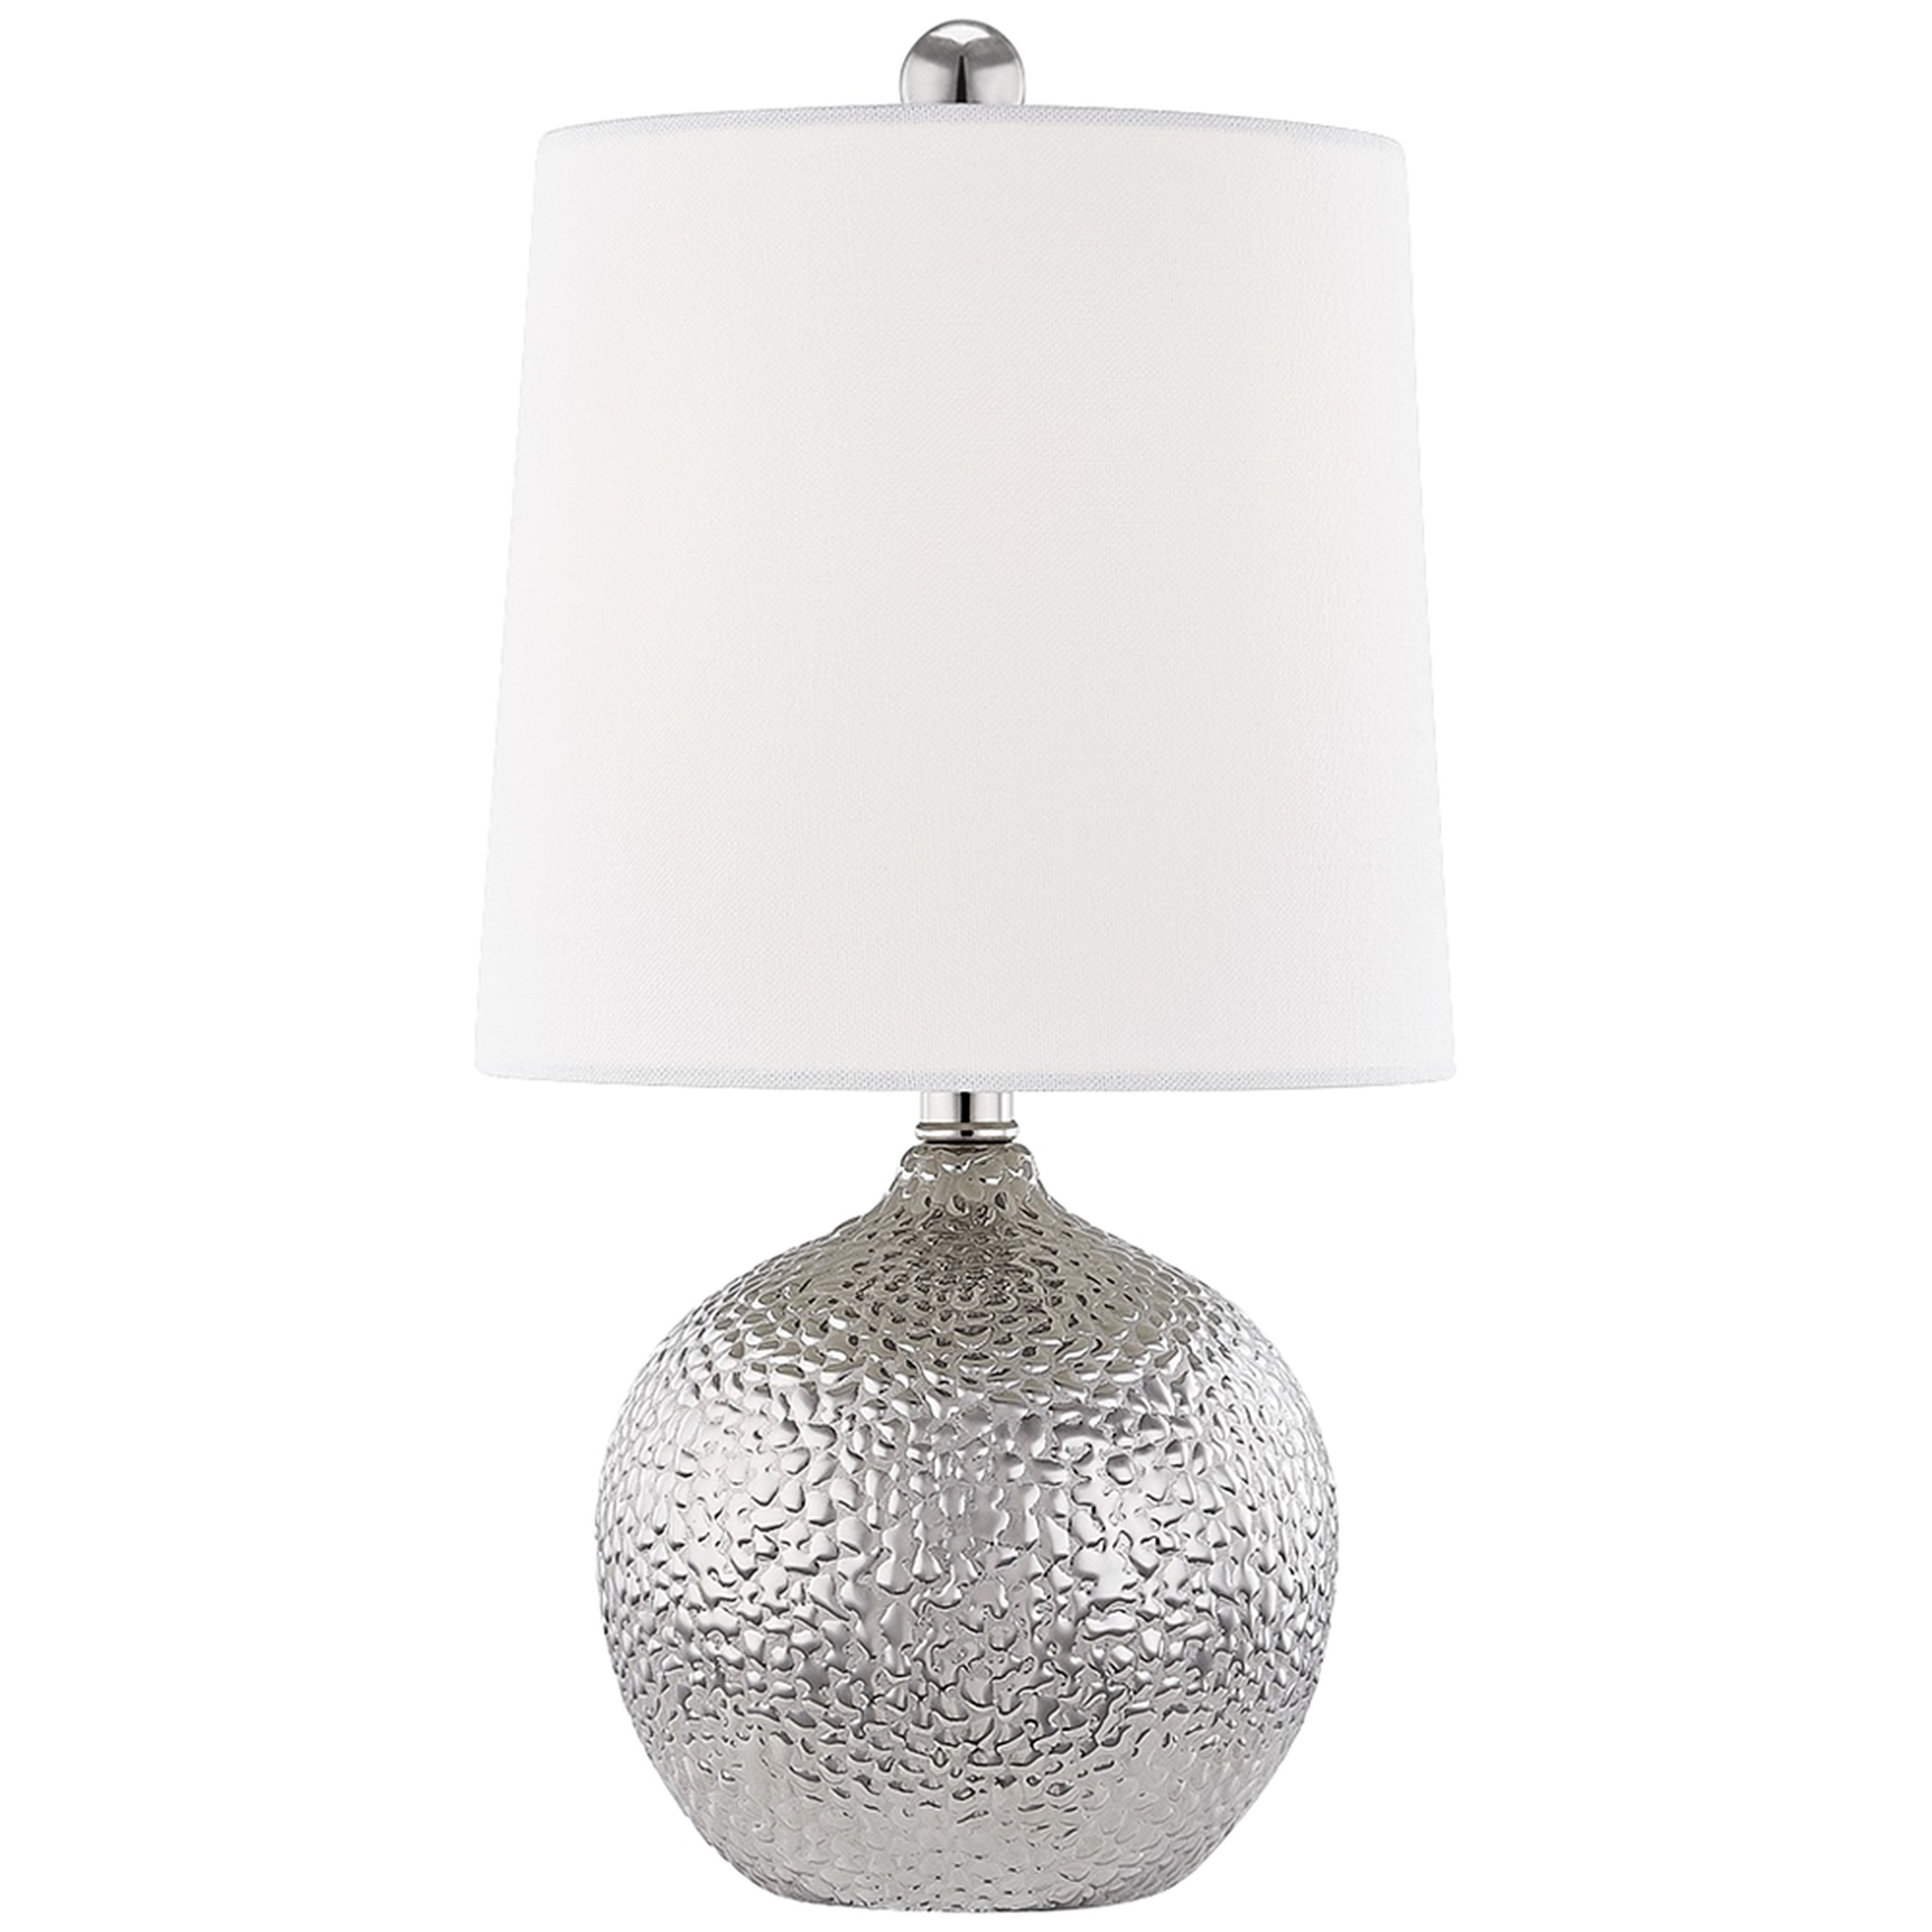 Mitzi Heather 14 1/2" High Silver Ceramic Accent Table Lamp - Style # 77A21 - Lamps Plus